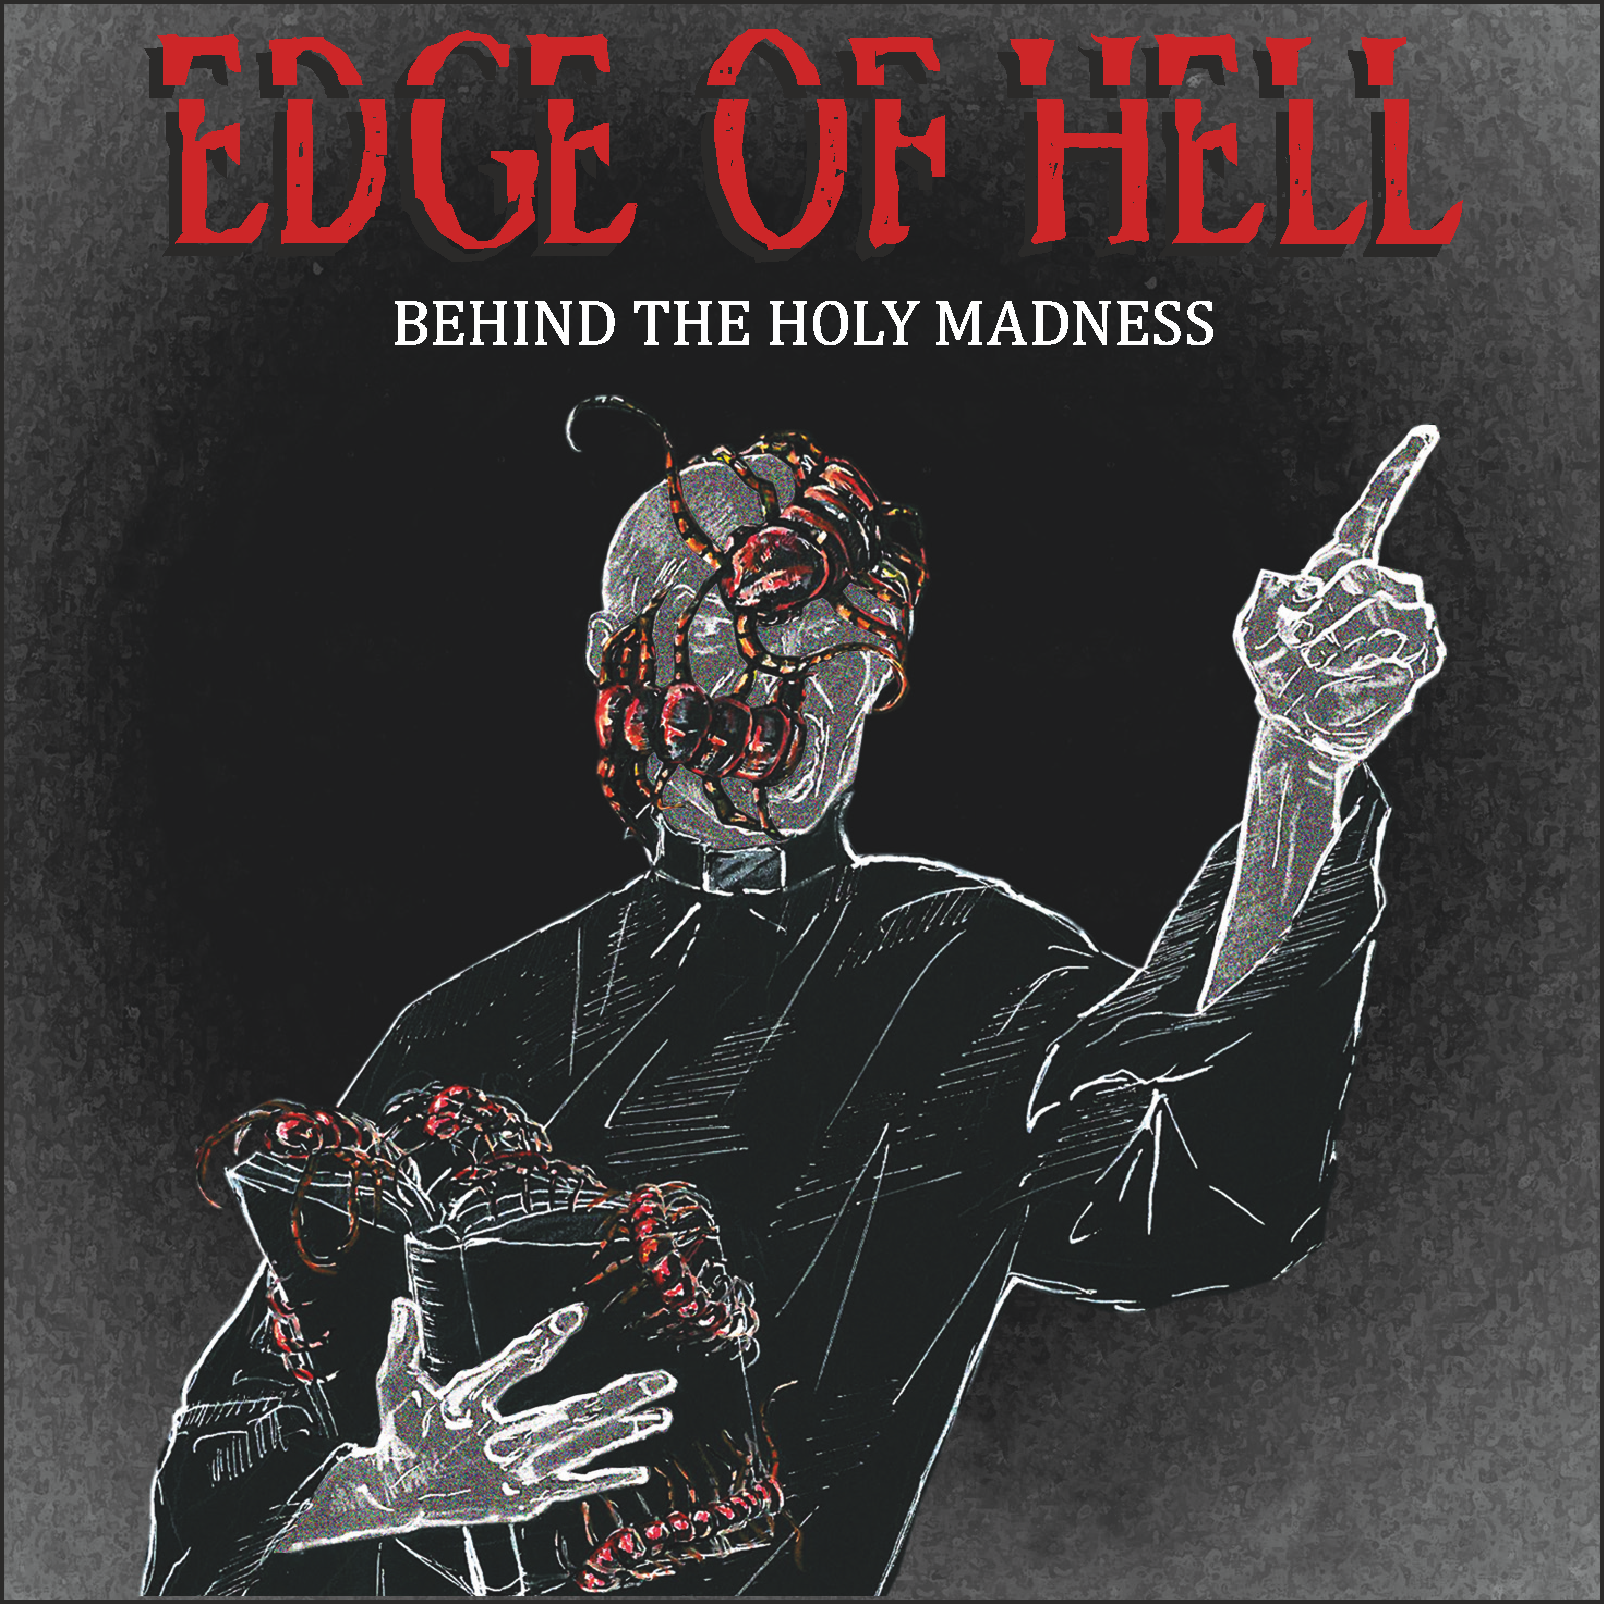 Interview with EDGE OF HELL